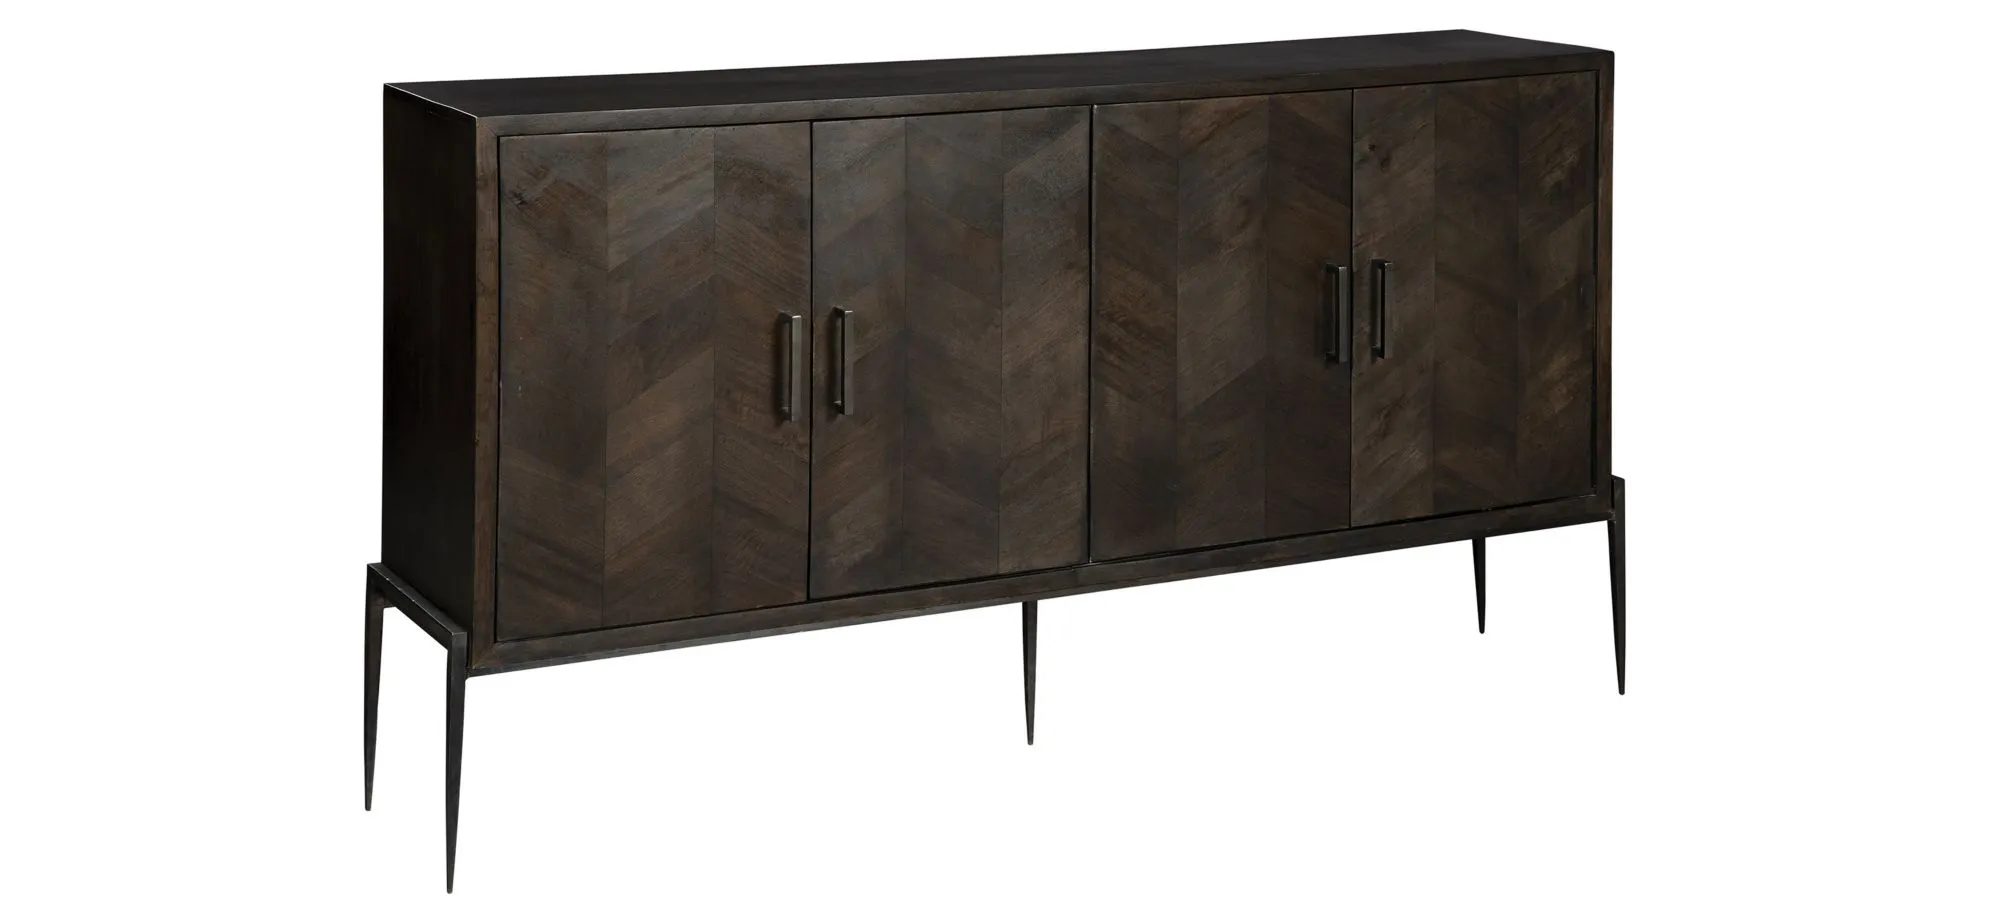 Yerington Entertainment Console in SPECIAL RESERVE by Hekman Furniture Company